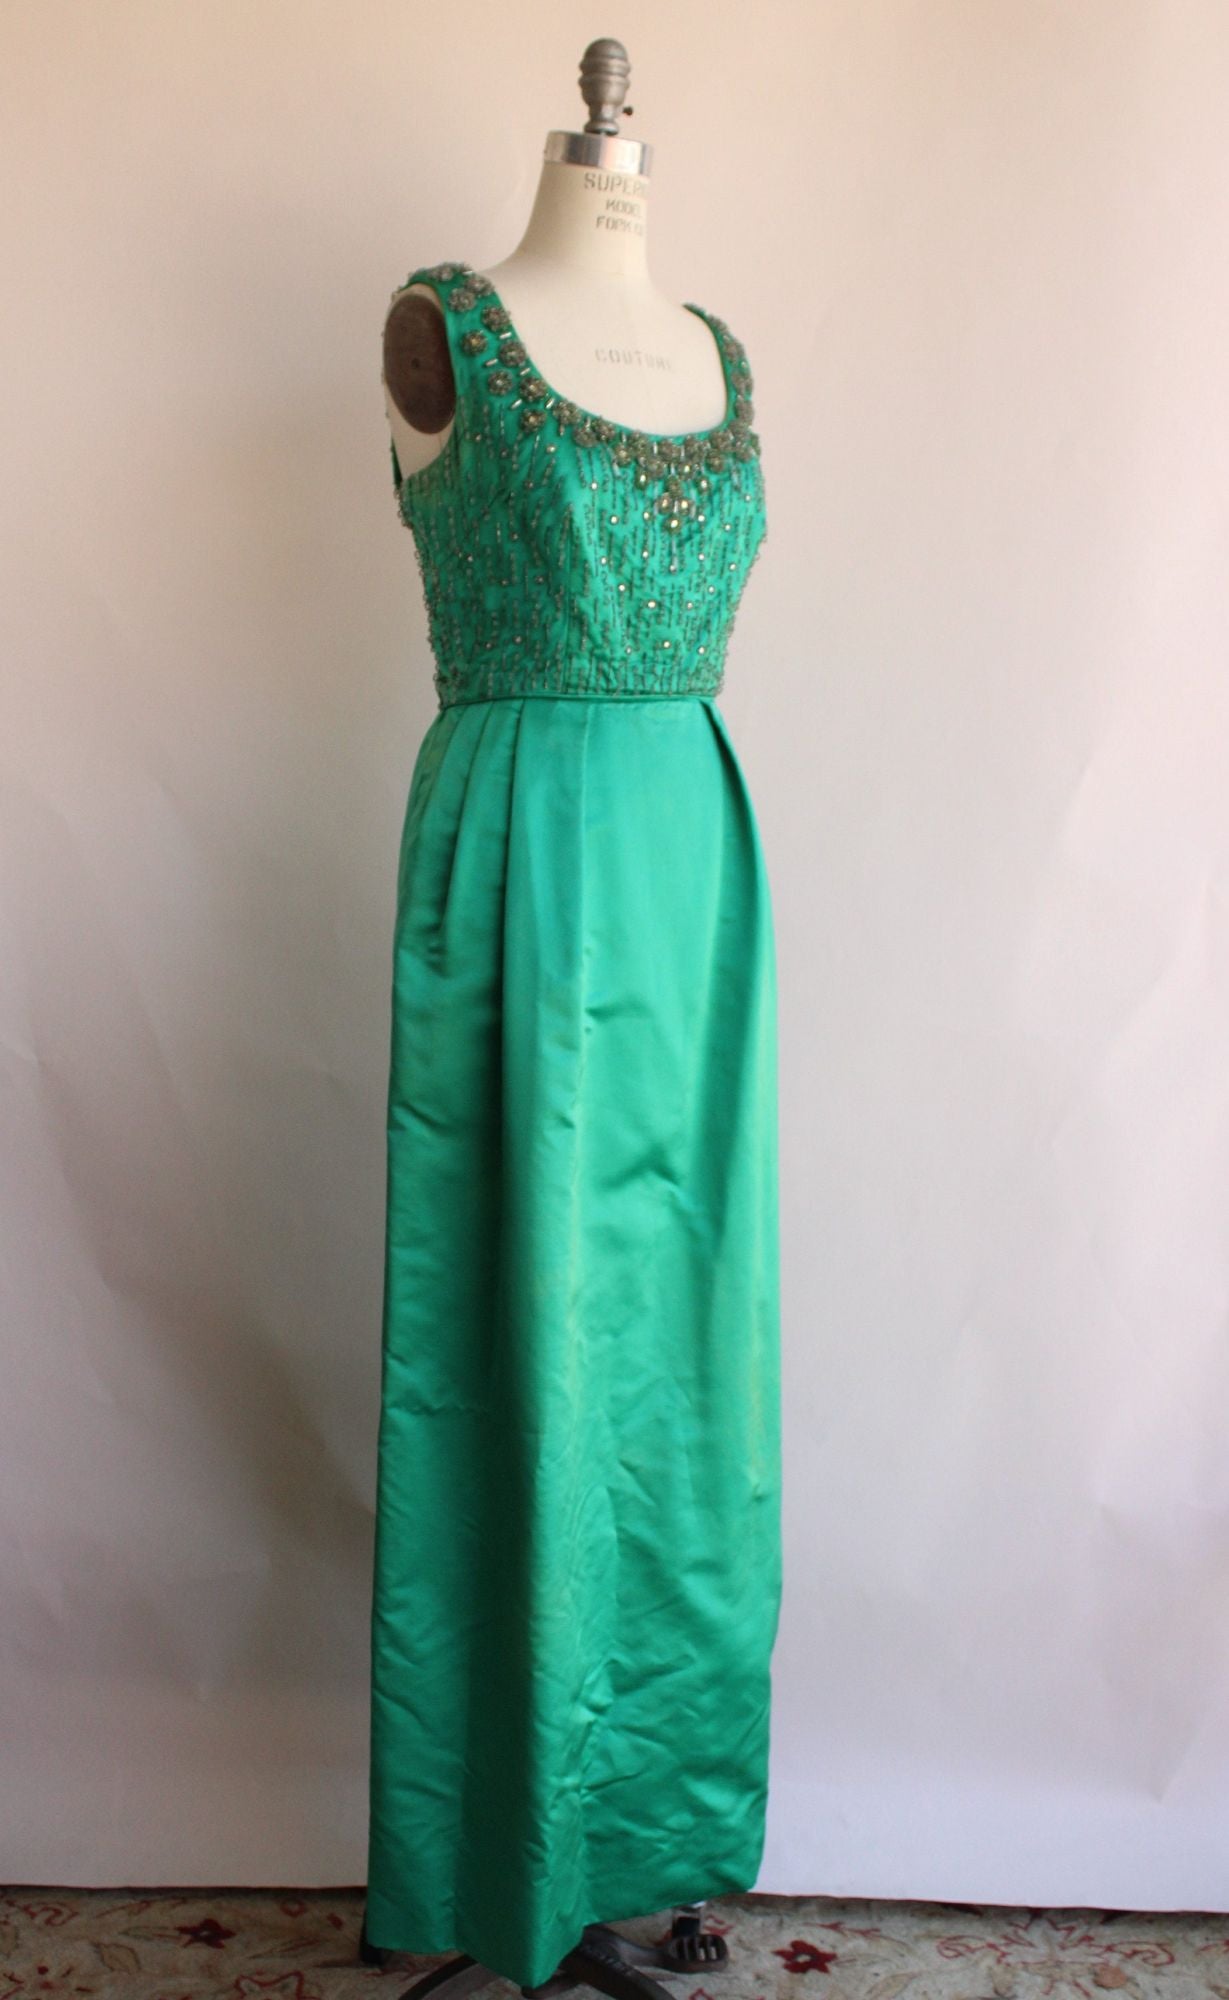 Vintage 1960s Gown with Pockets, Rudolf Green Silk Wiggle Dress, Saks Fifth Avenue